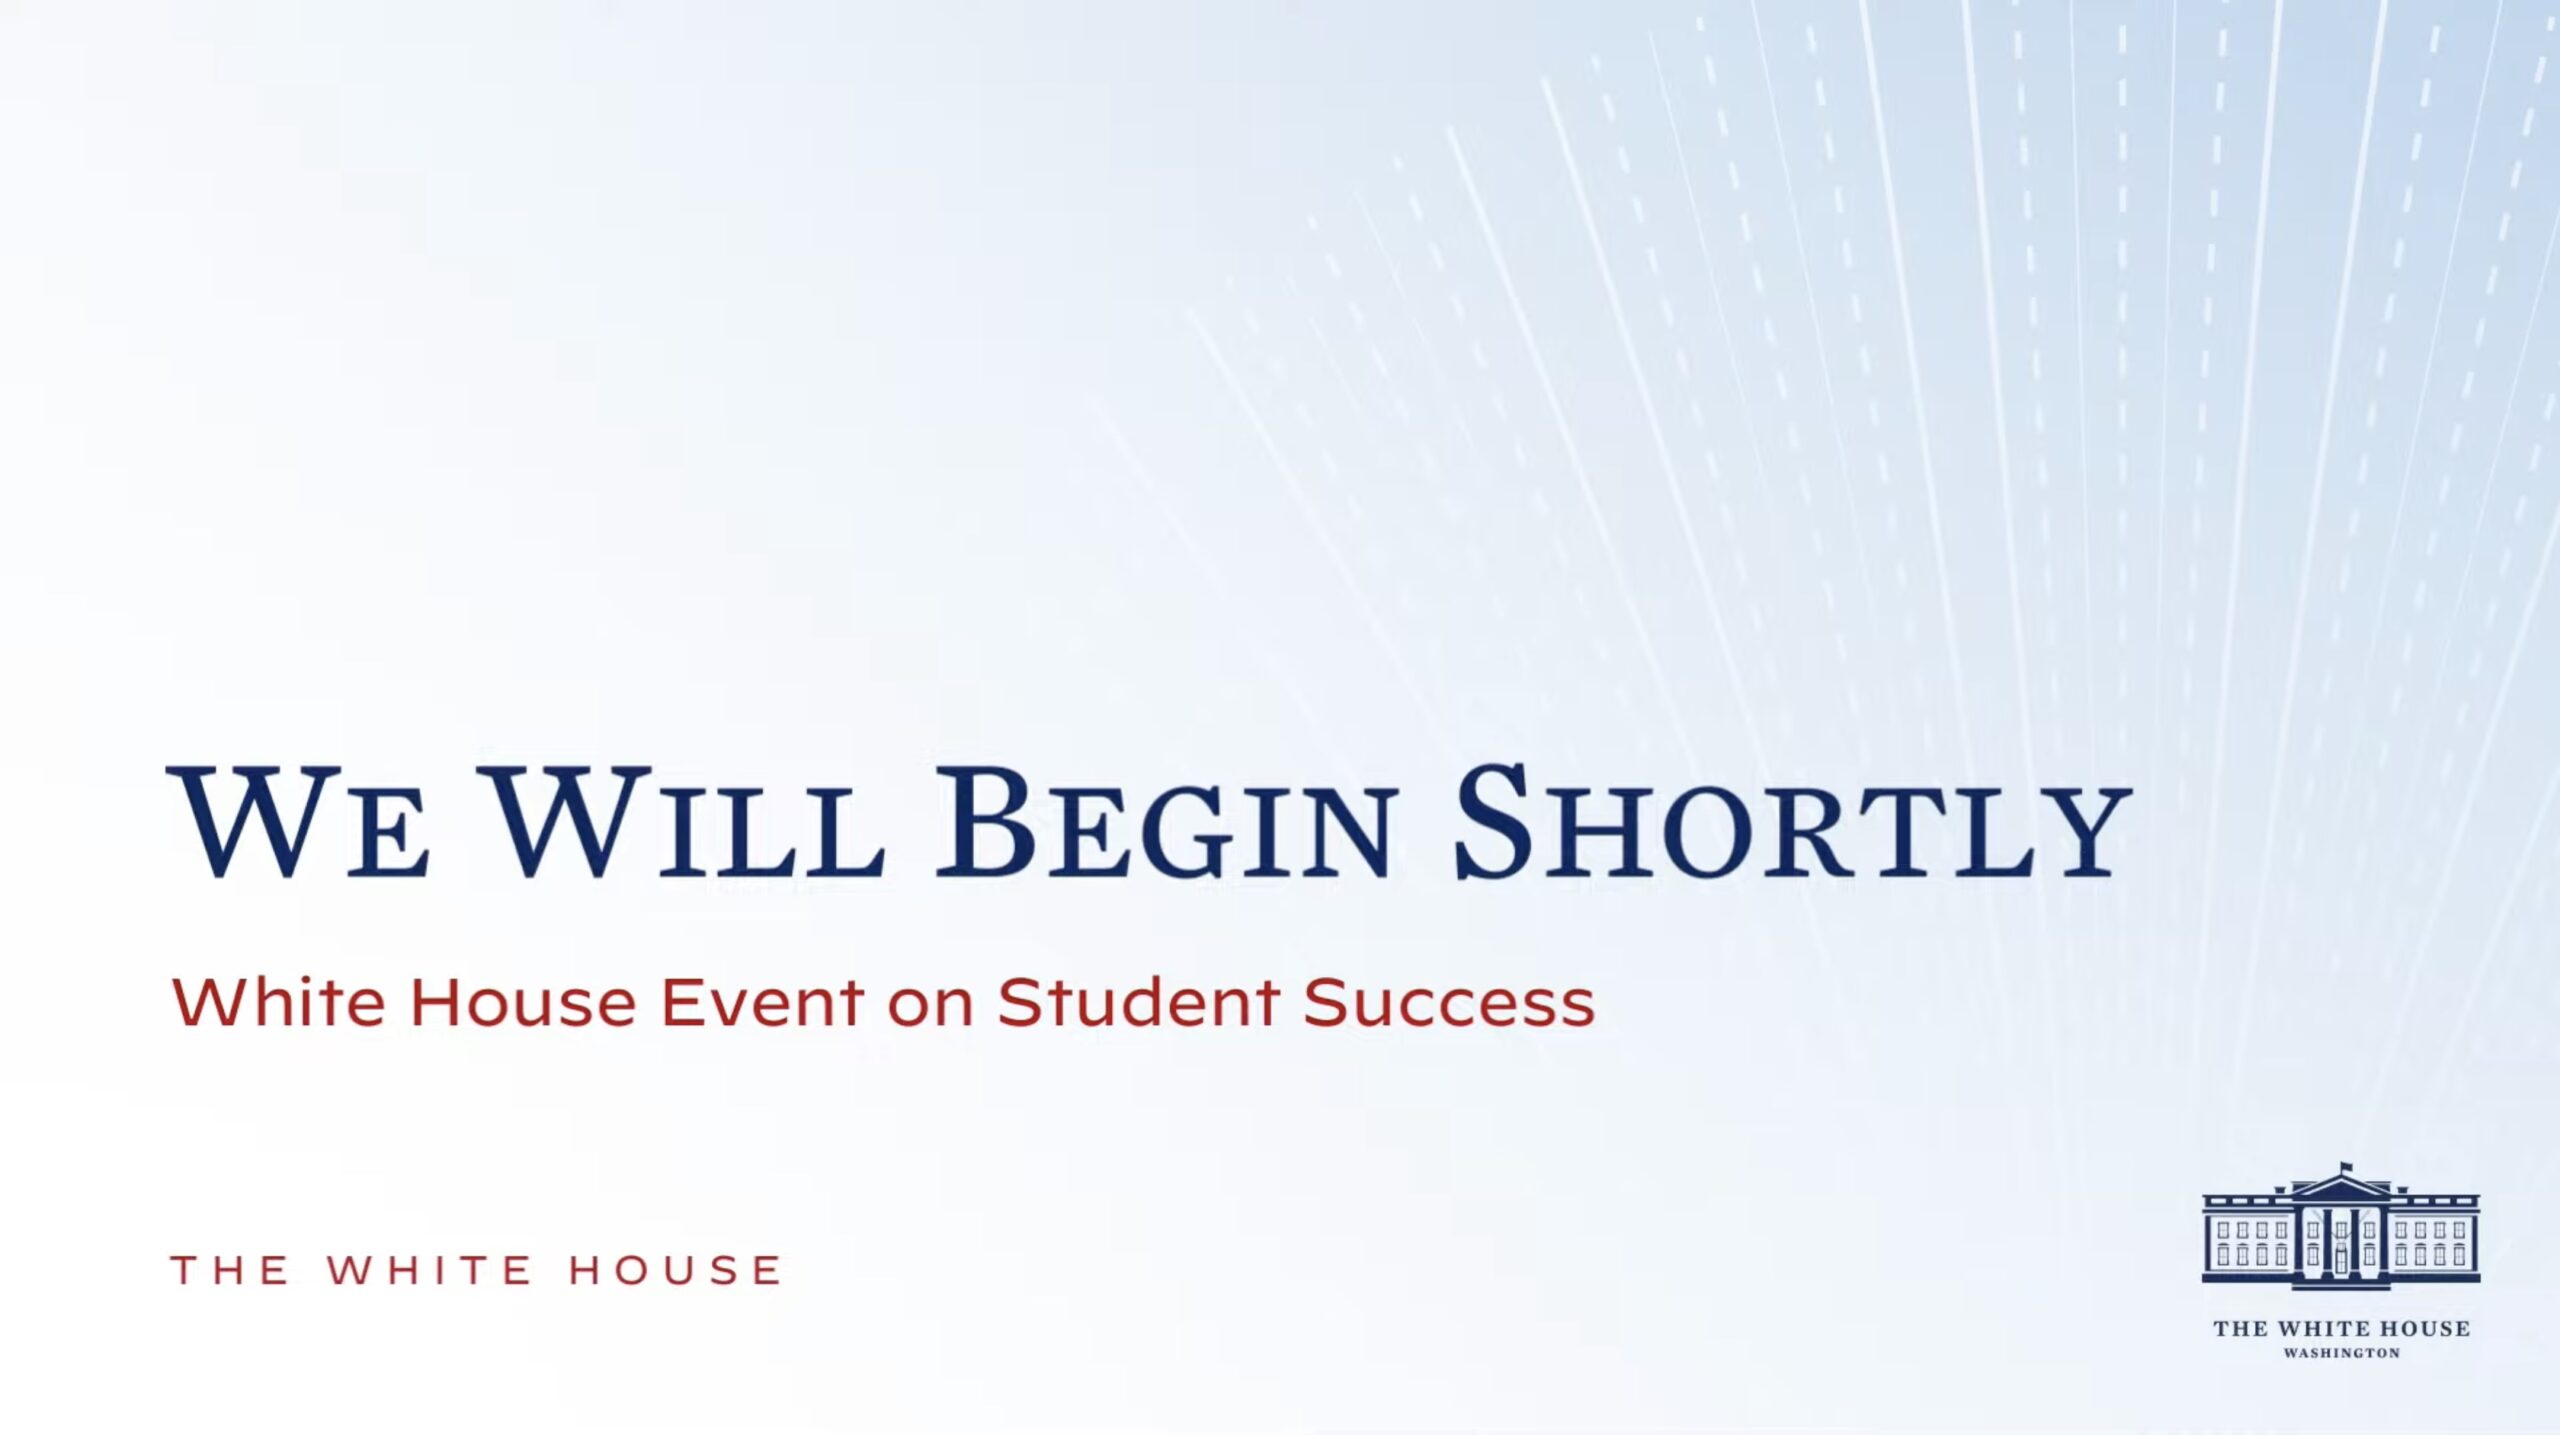 National Partnership for Student Success launch white house event